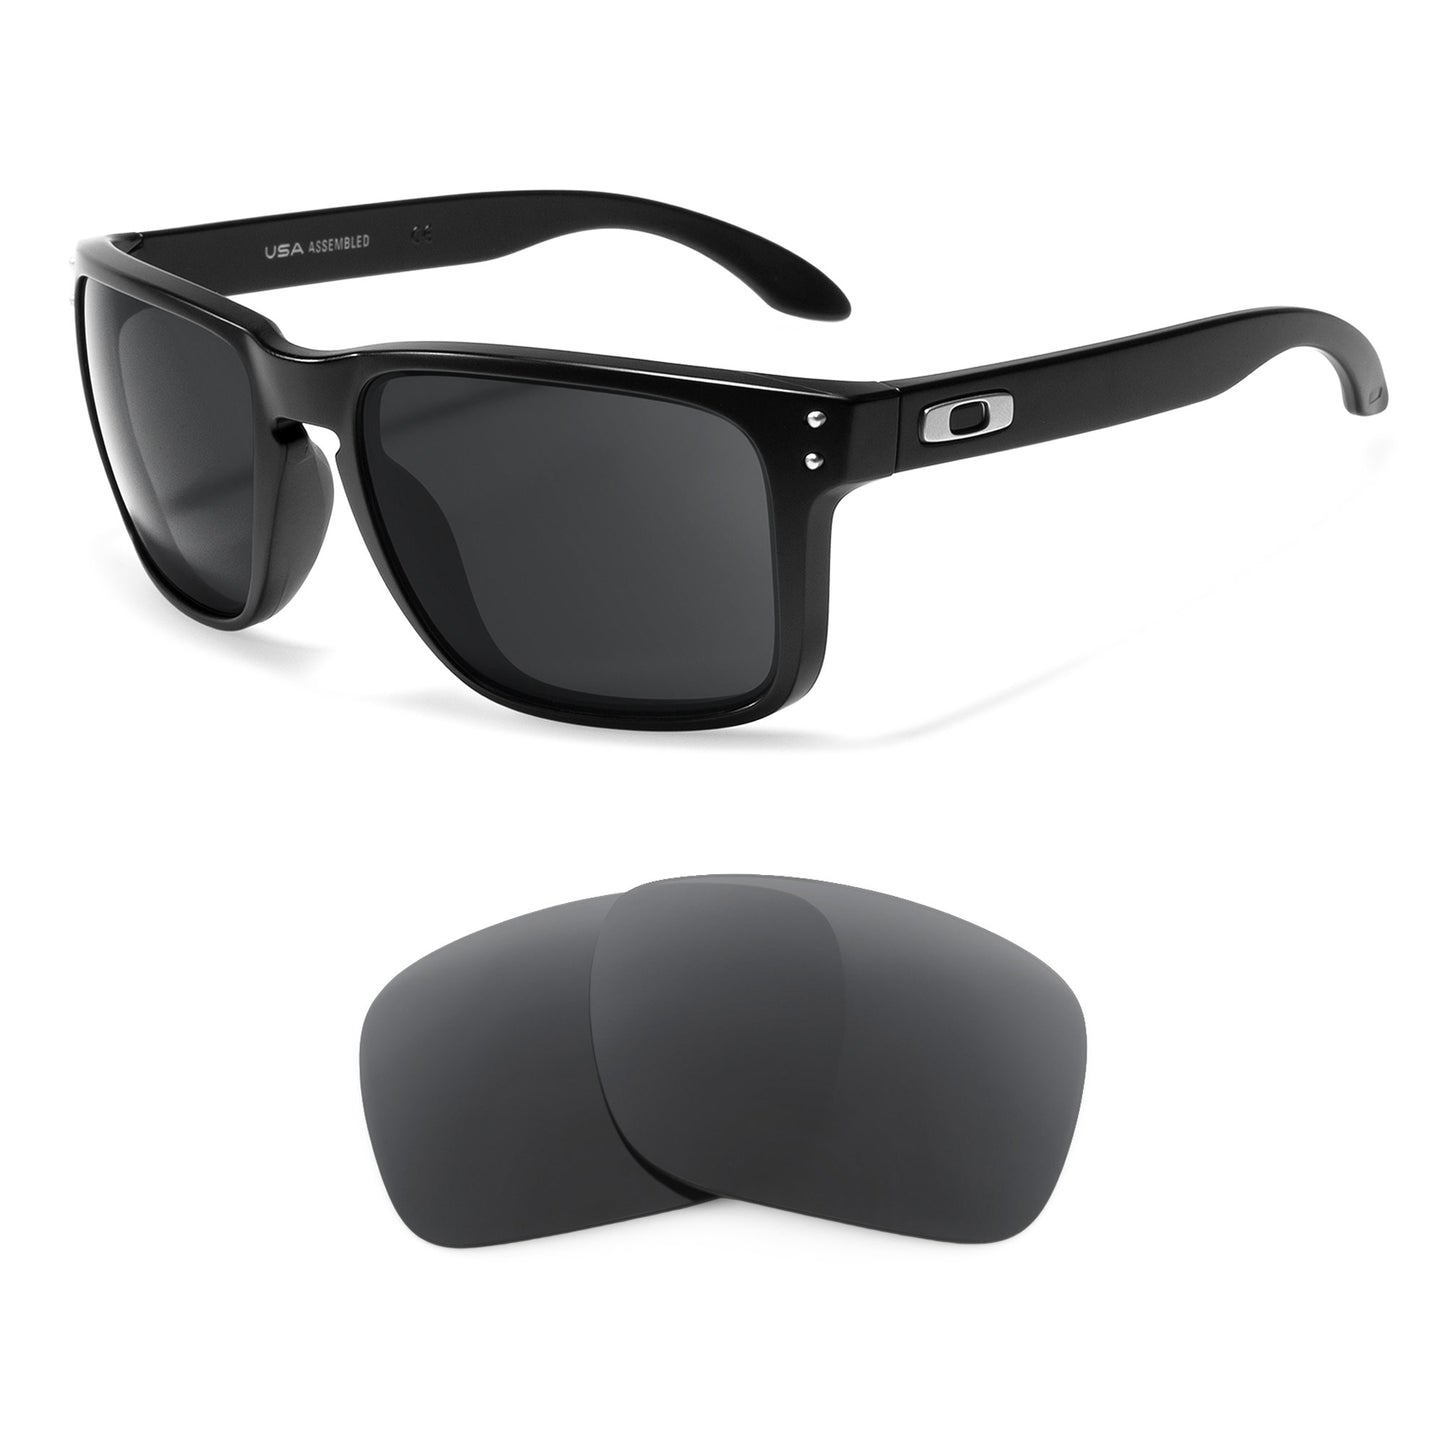 Oakley Holbrook XL sunglasses with replacement lenses